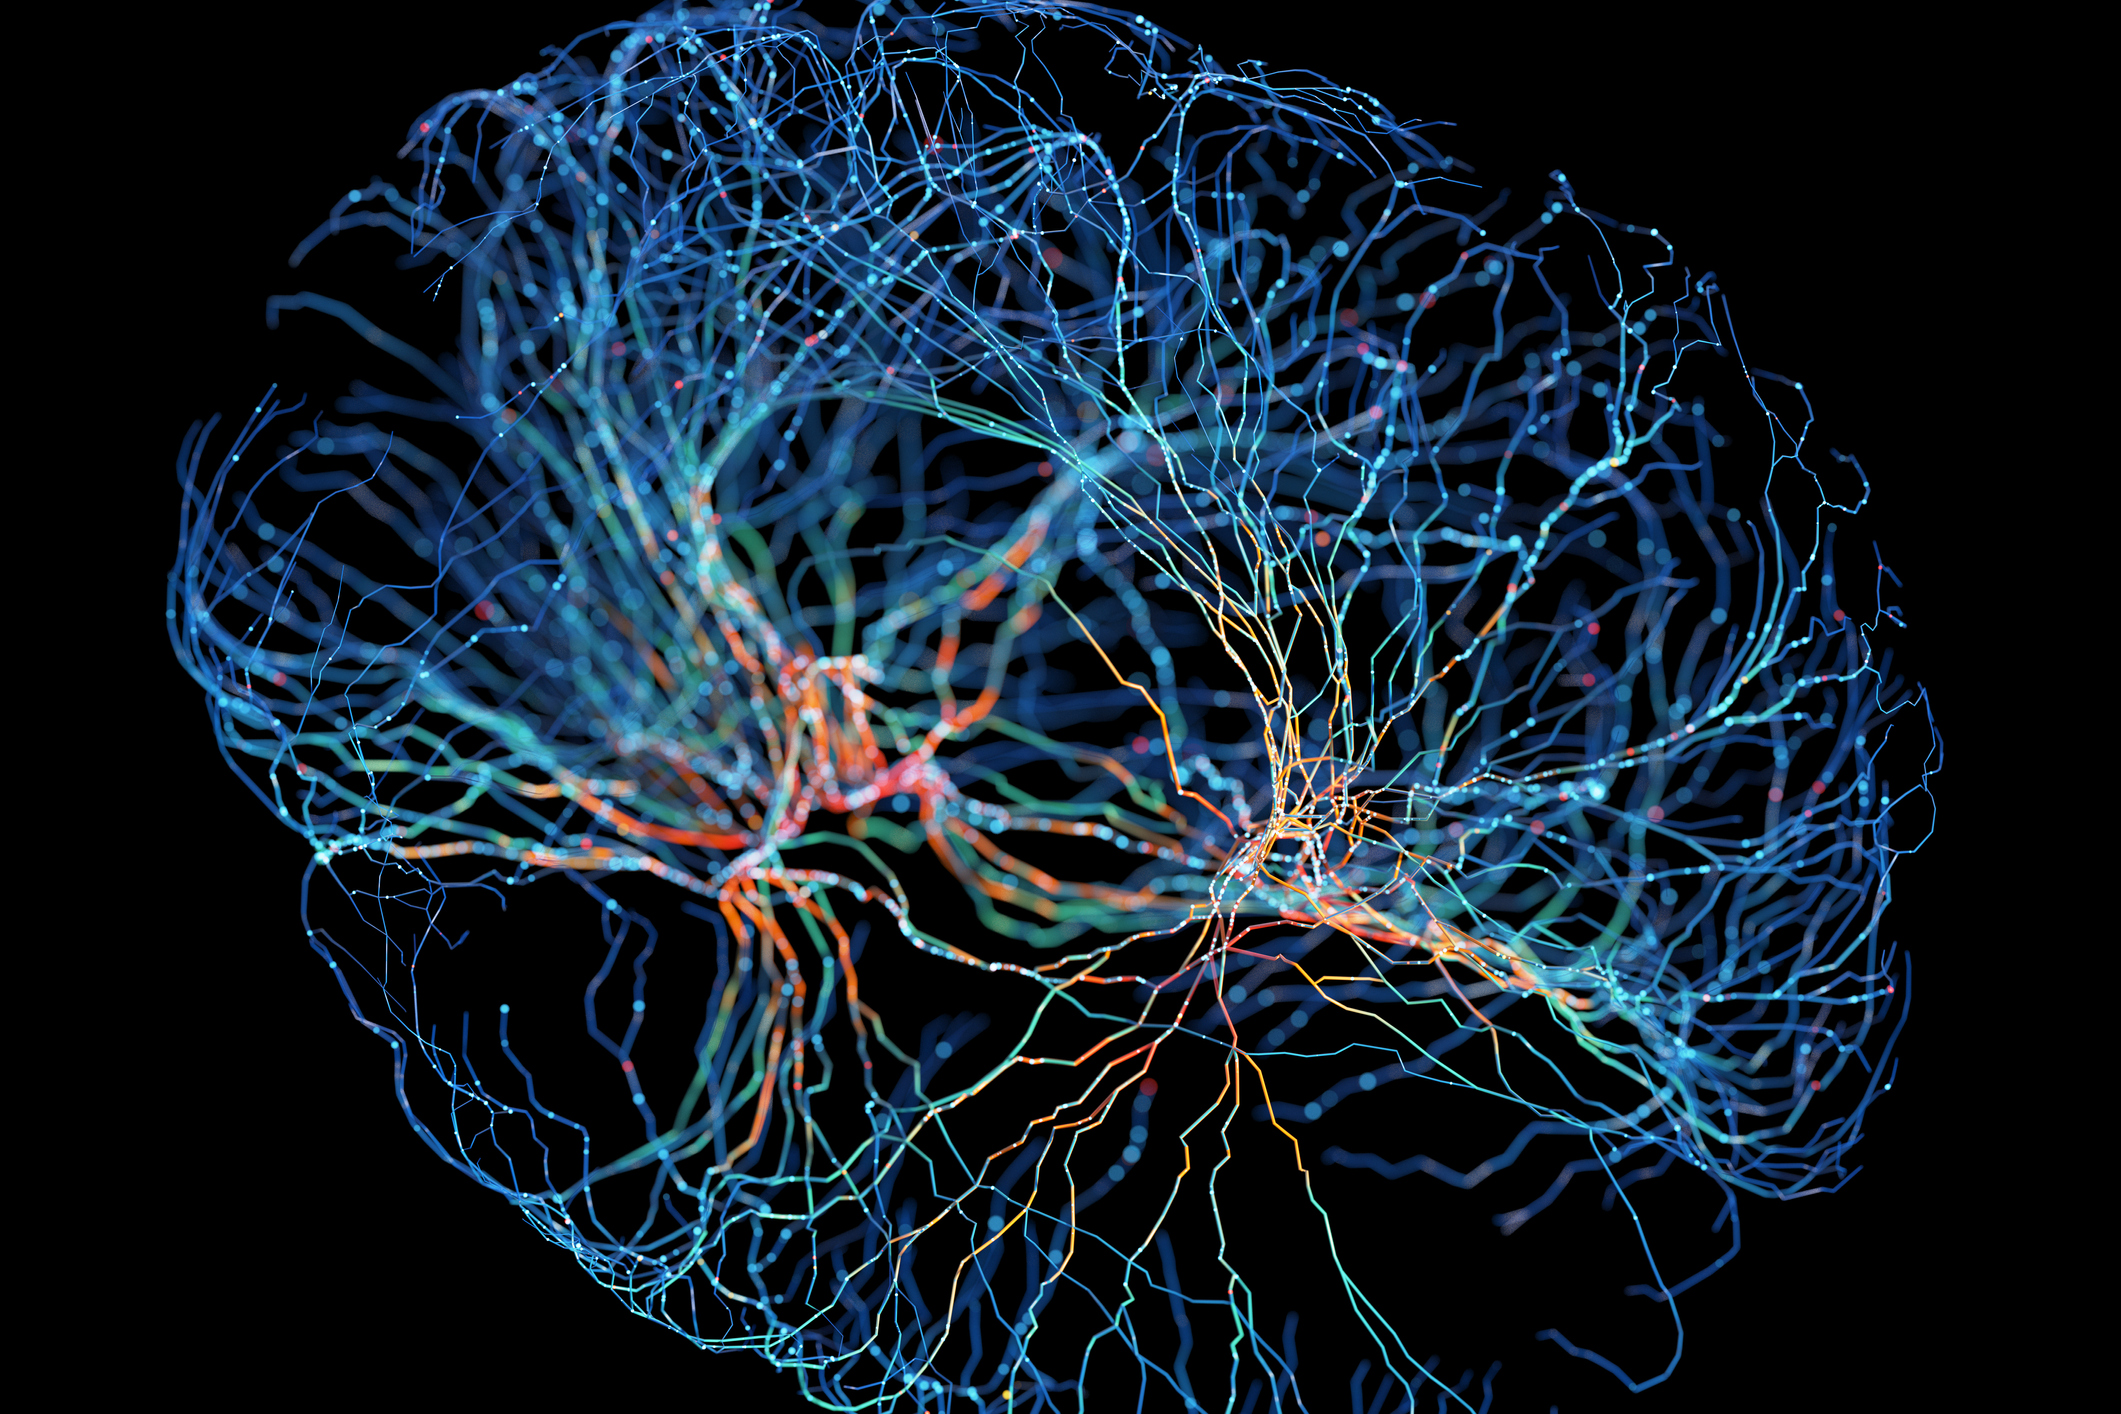 System of neurons with glowing connections on black background (Getty Images&mdash;© Andriy Onufriyenko)